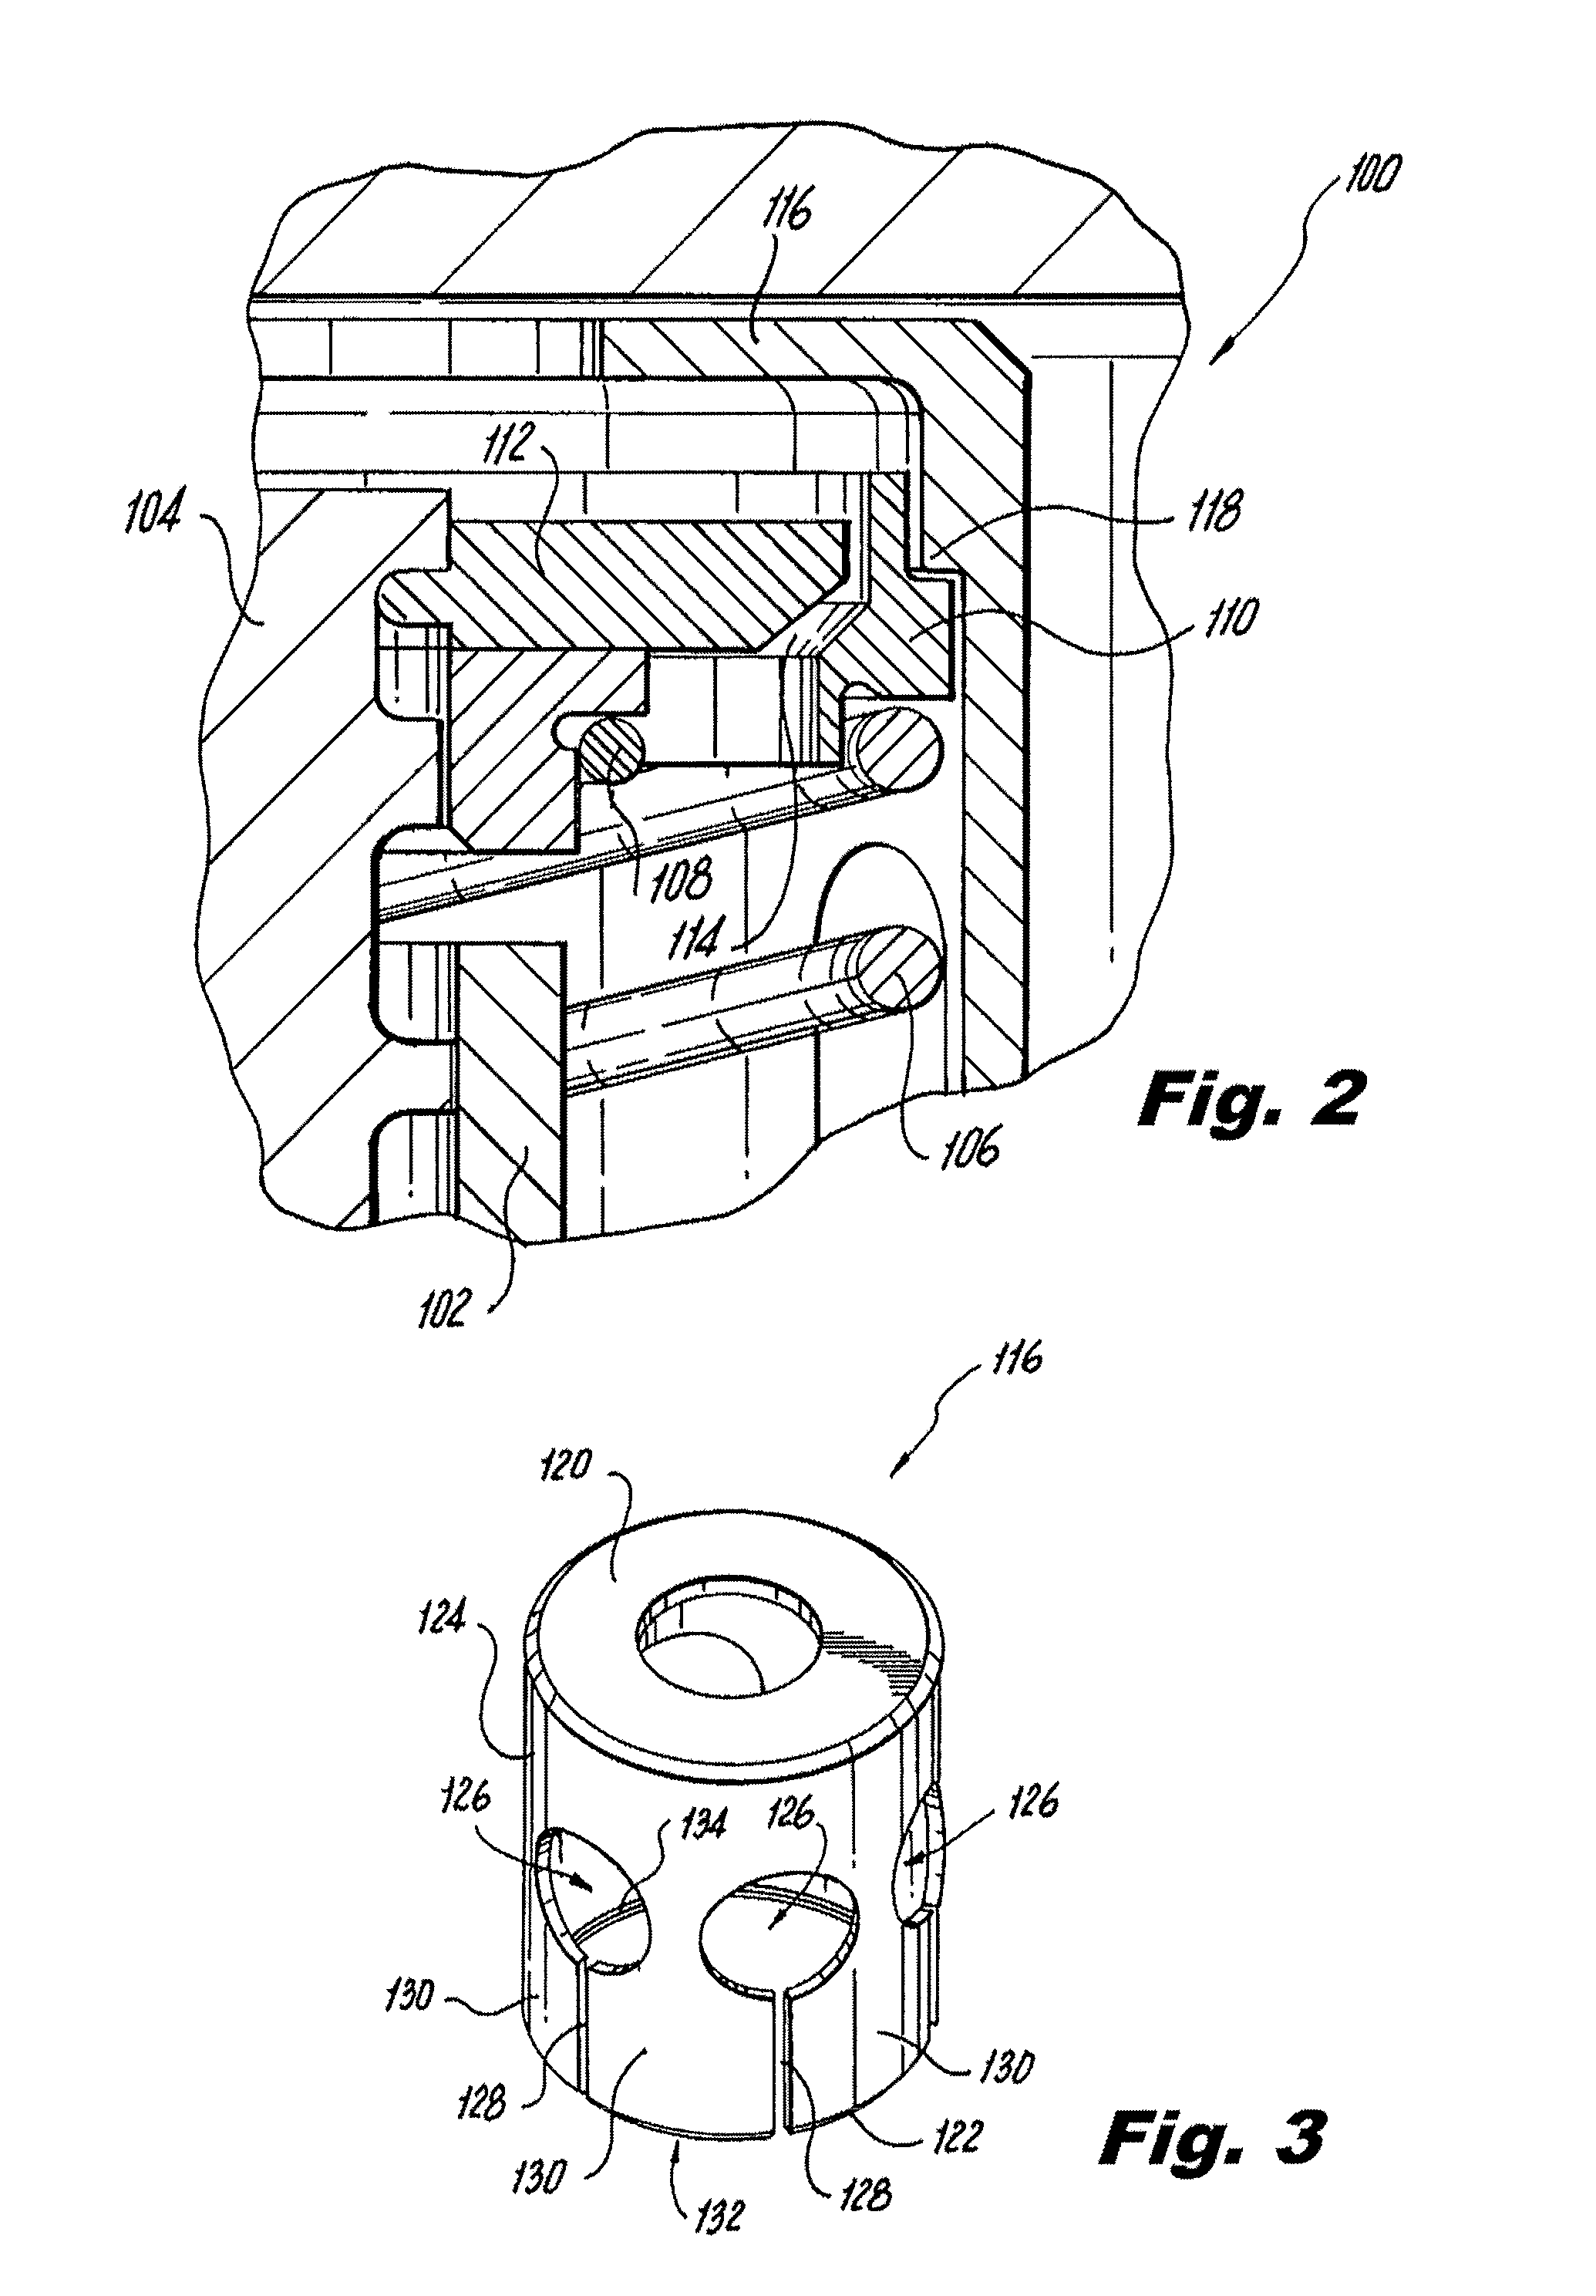 System and method for locking retention of valve components